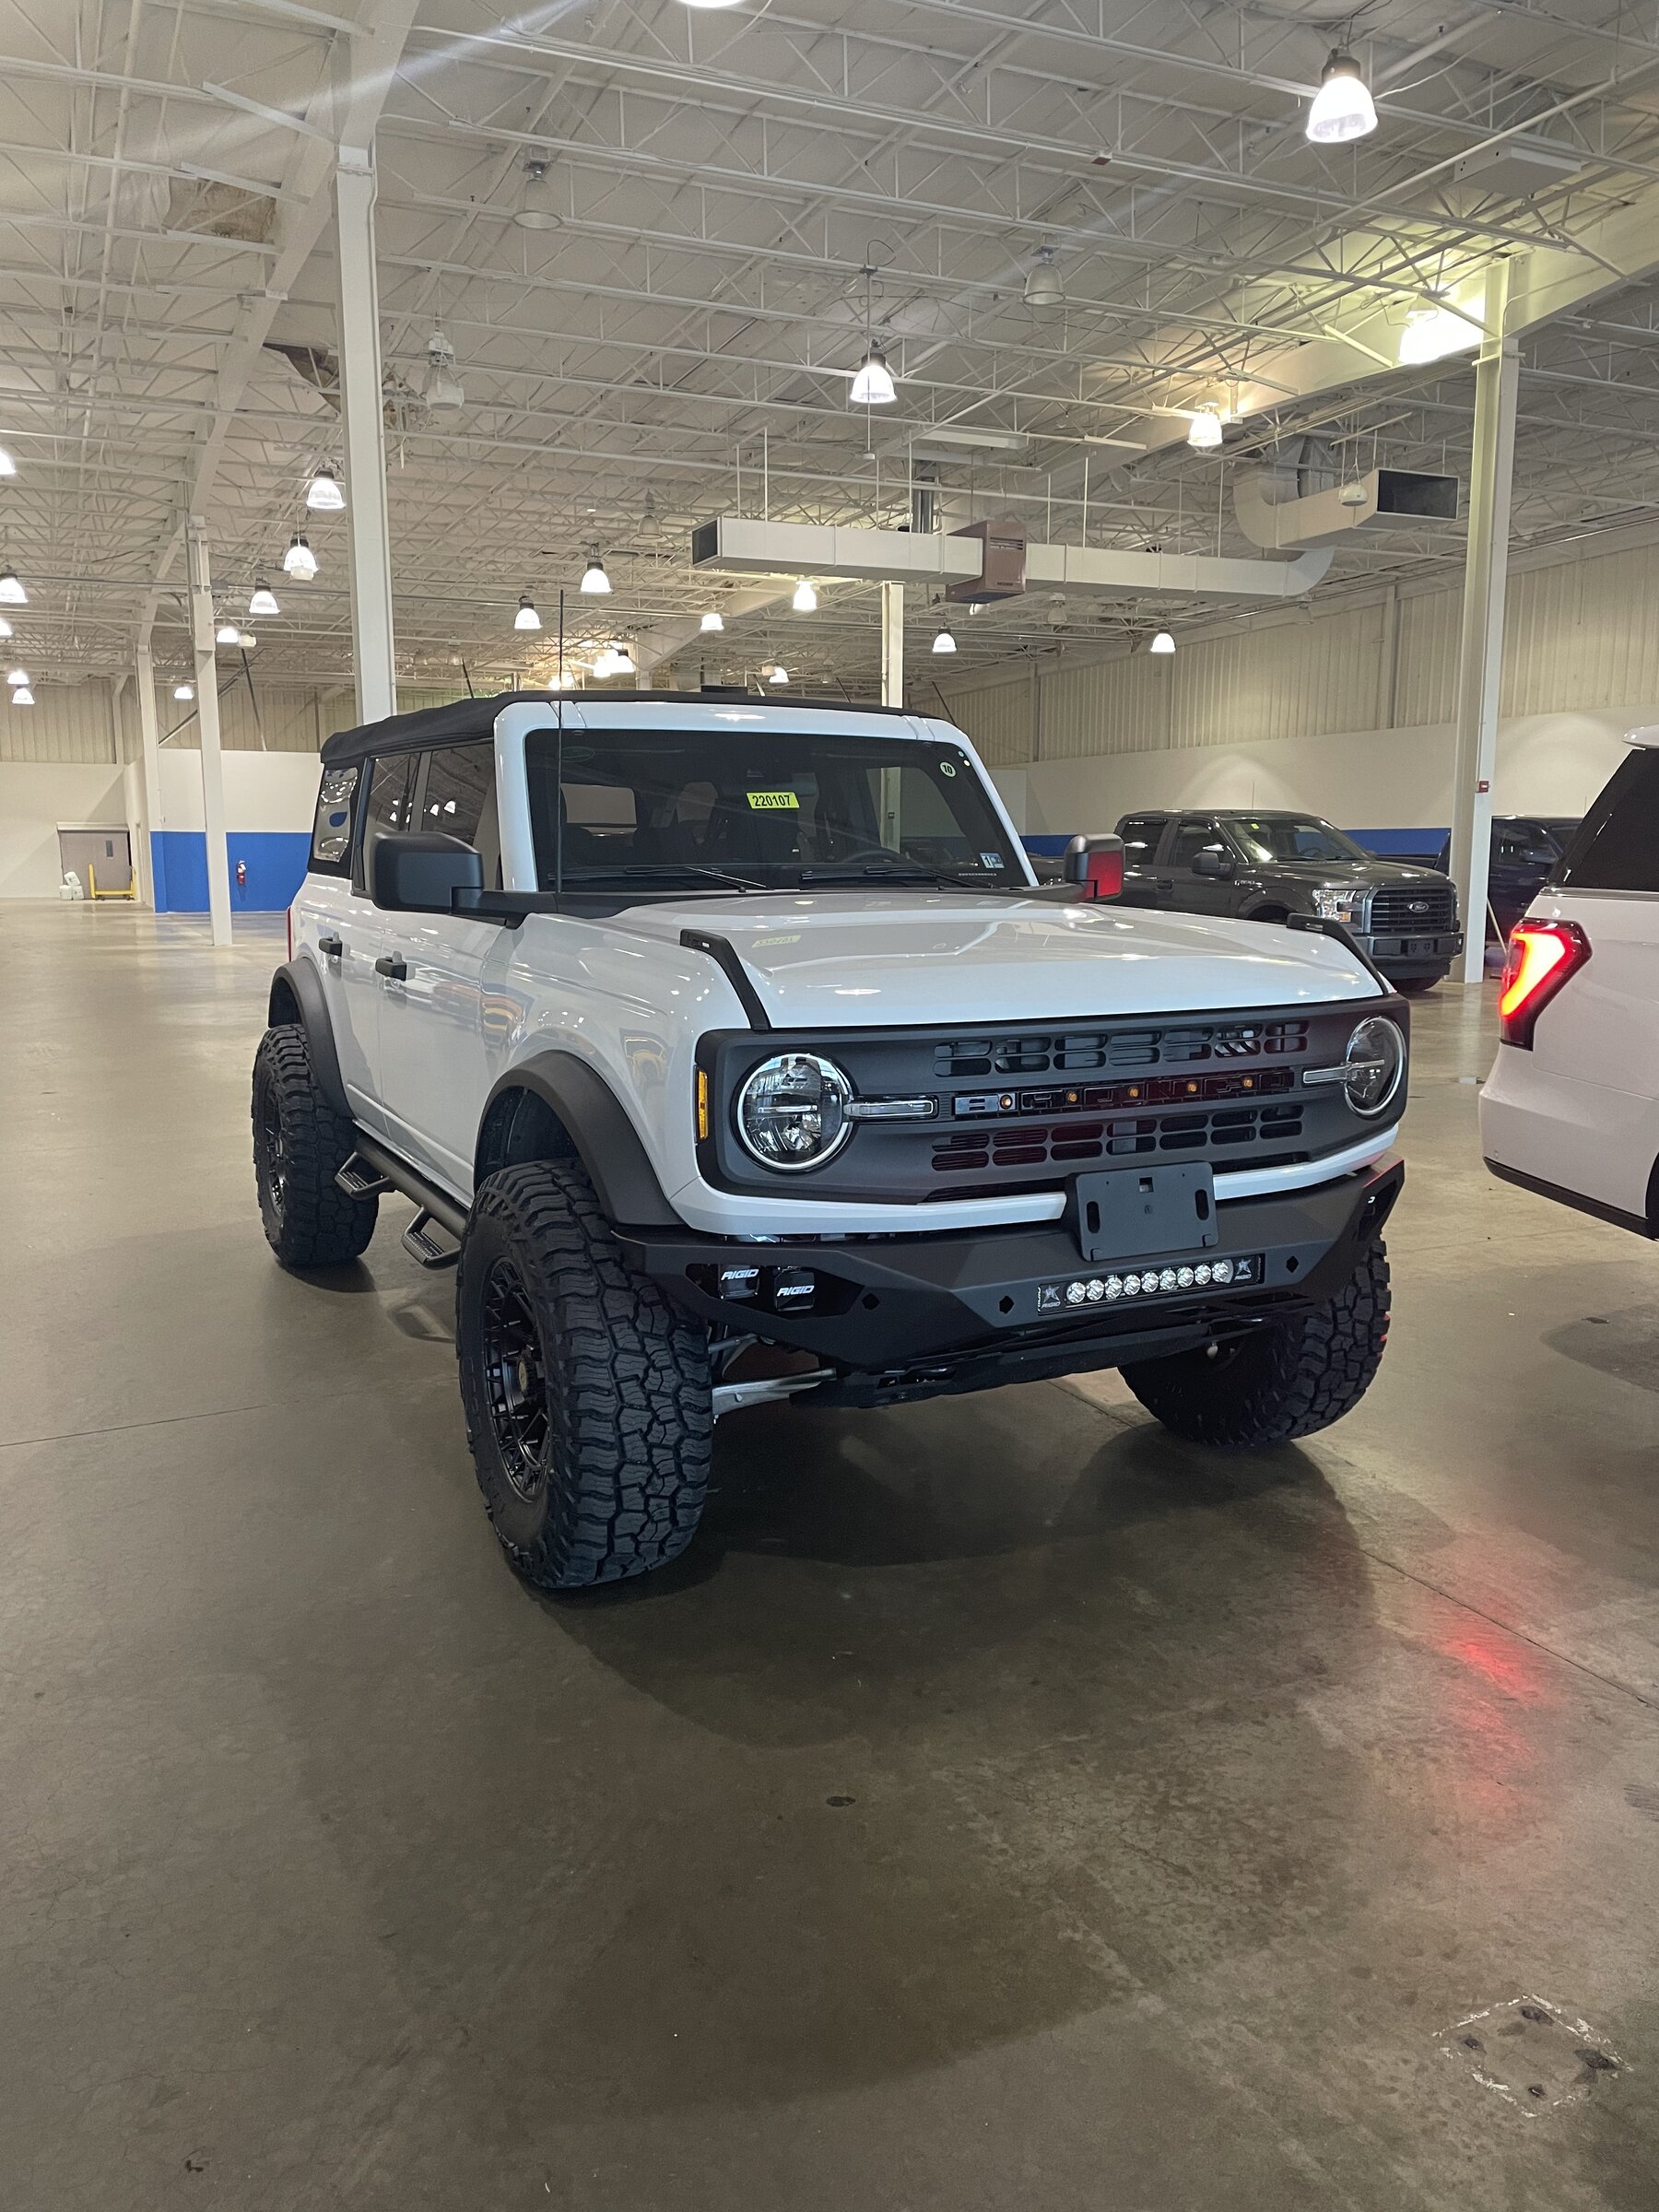 Ford Bronco Base Model Owners: Official Thread tempImage7iUyTd